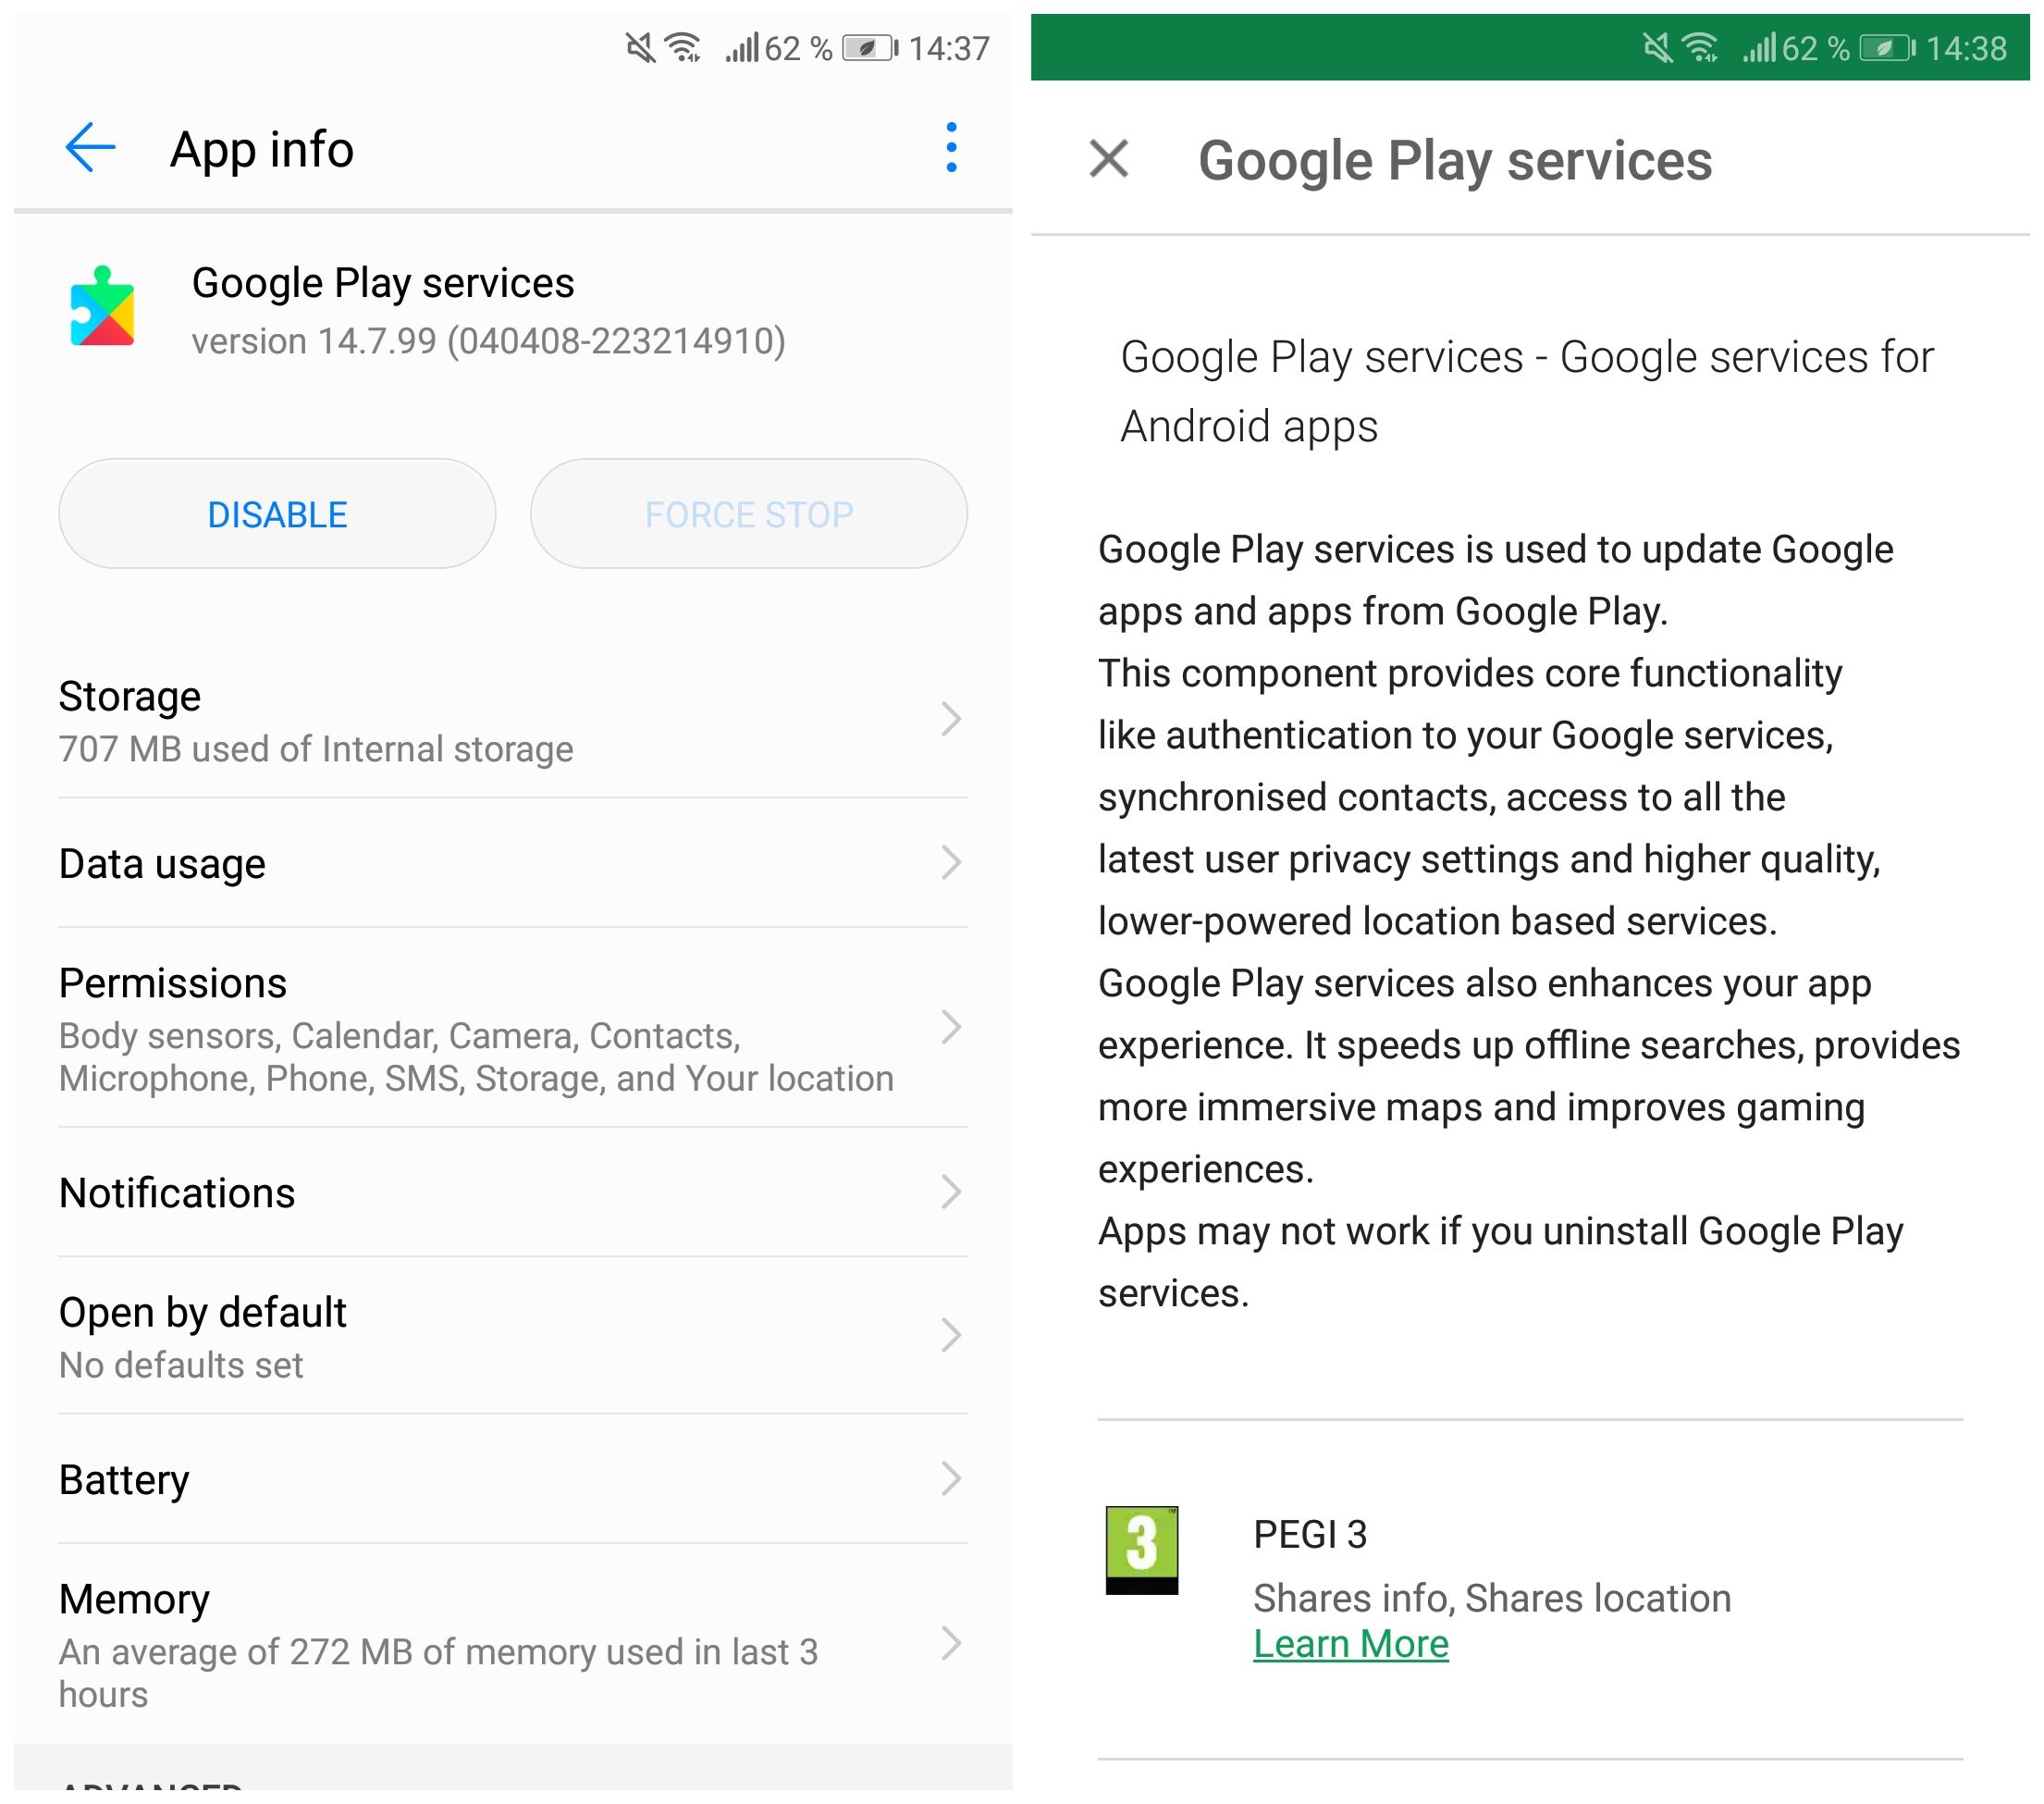 google play services the heartbeat of